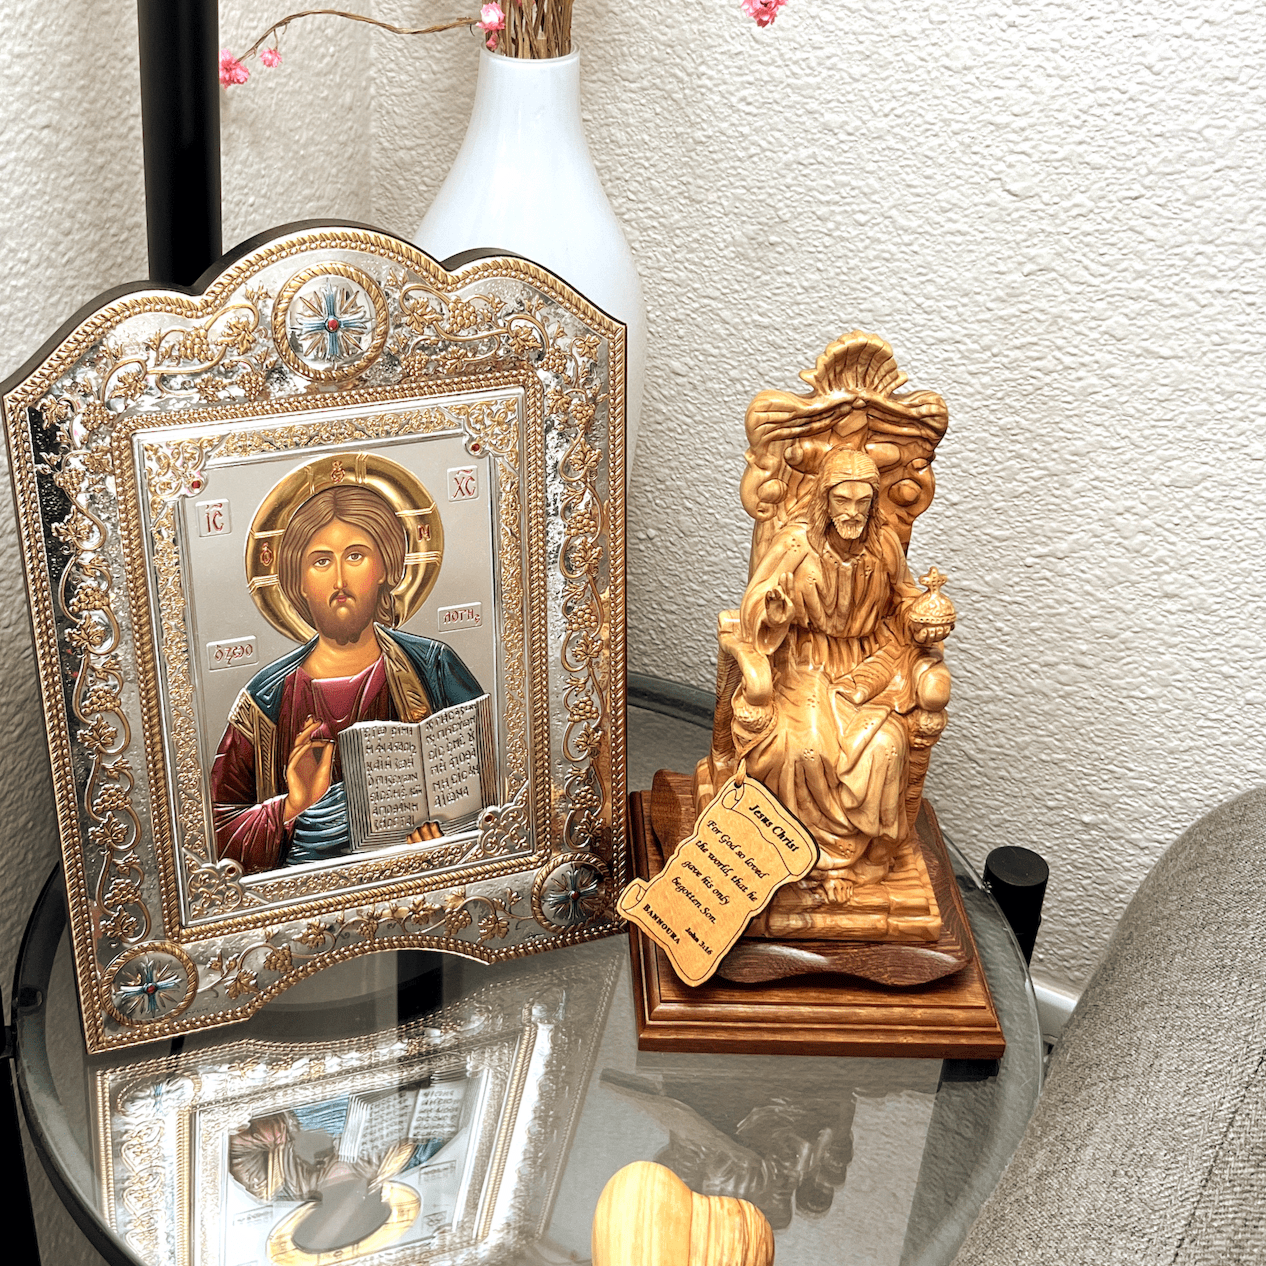 Jesus Christ Our Lord Sitting on His Throne, with Beautiful Wall Hanging Ten Commandments with Holy Land Incense inside Glass capsule , Next to Wooden Carved Heart, and beautiful Silver Icon of the Son of Man in Color , Orthodox Art 